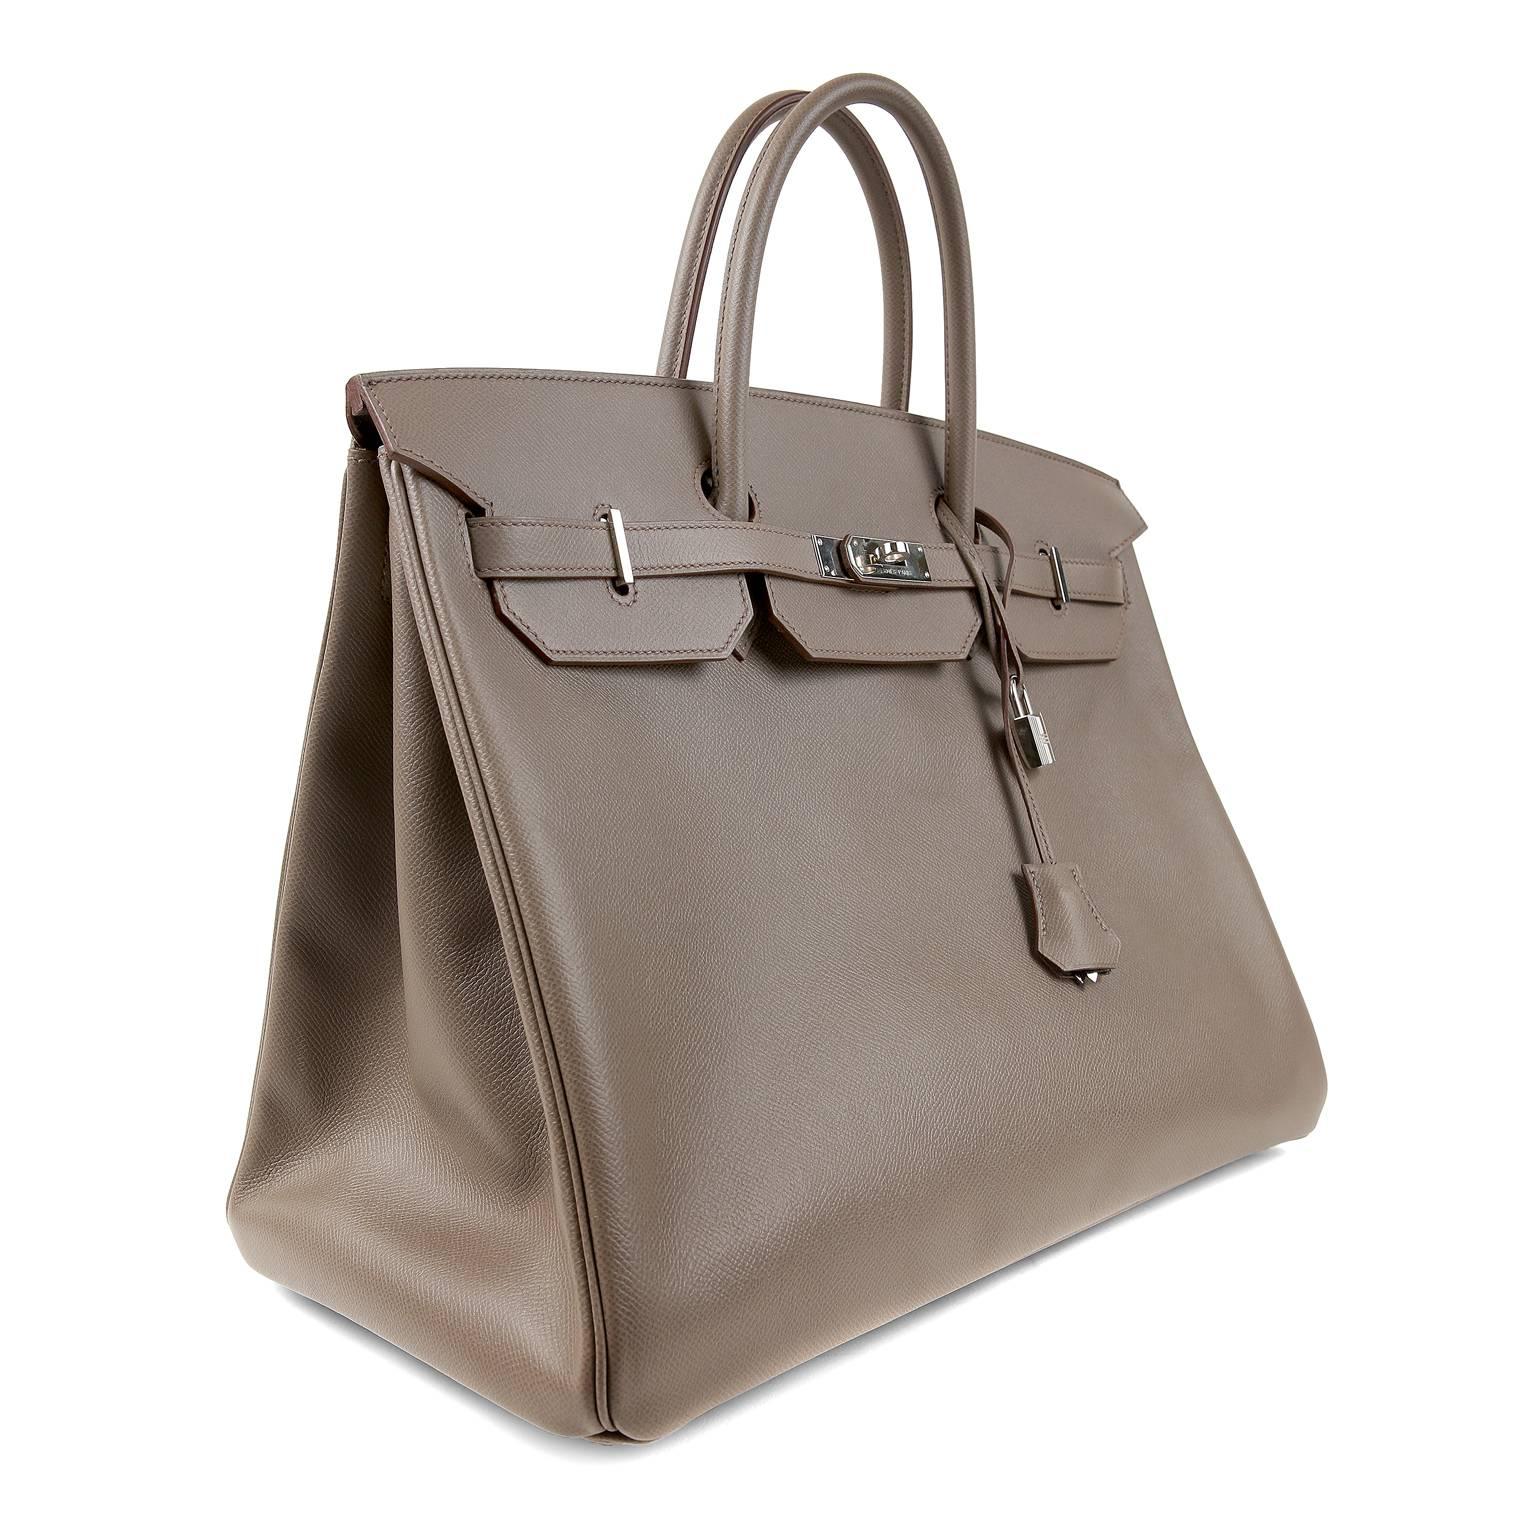 Hermès Etain Epsom 40 cm Birkin Bag- Pristine Condition
 Considered the ultimate luxury item, the Hermès Birkin is stitched by hand. Waitlists are commonplace.   Etain, a very desirable neutral, is universally flattering and wearable